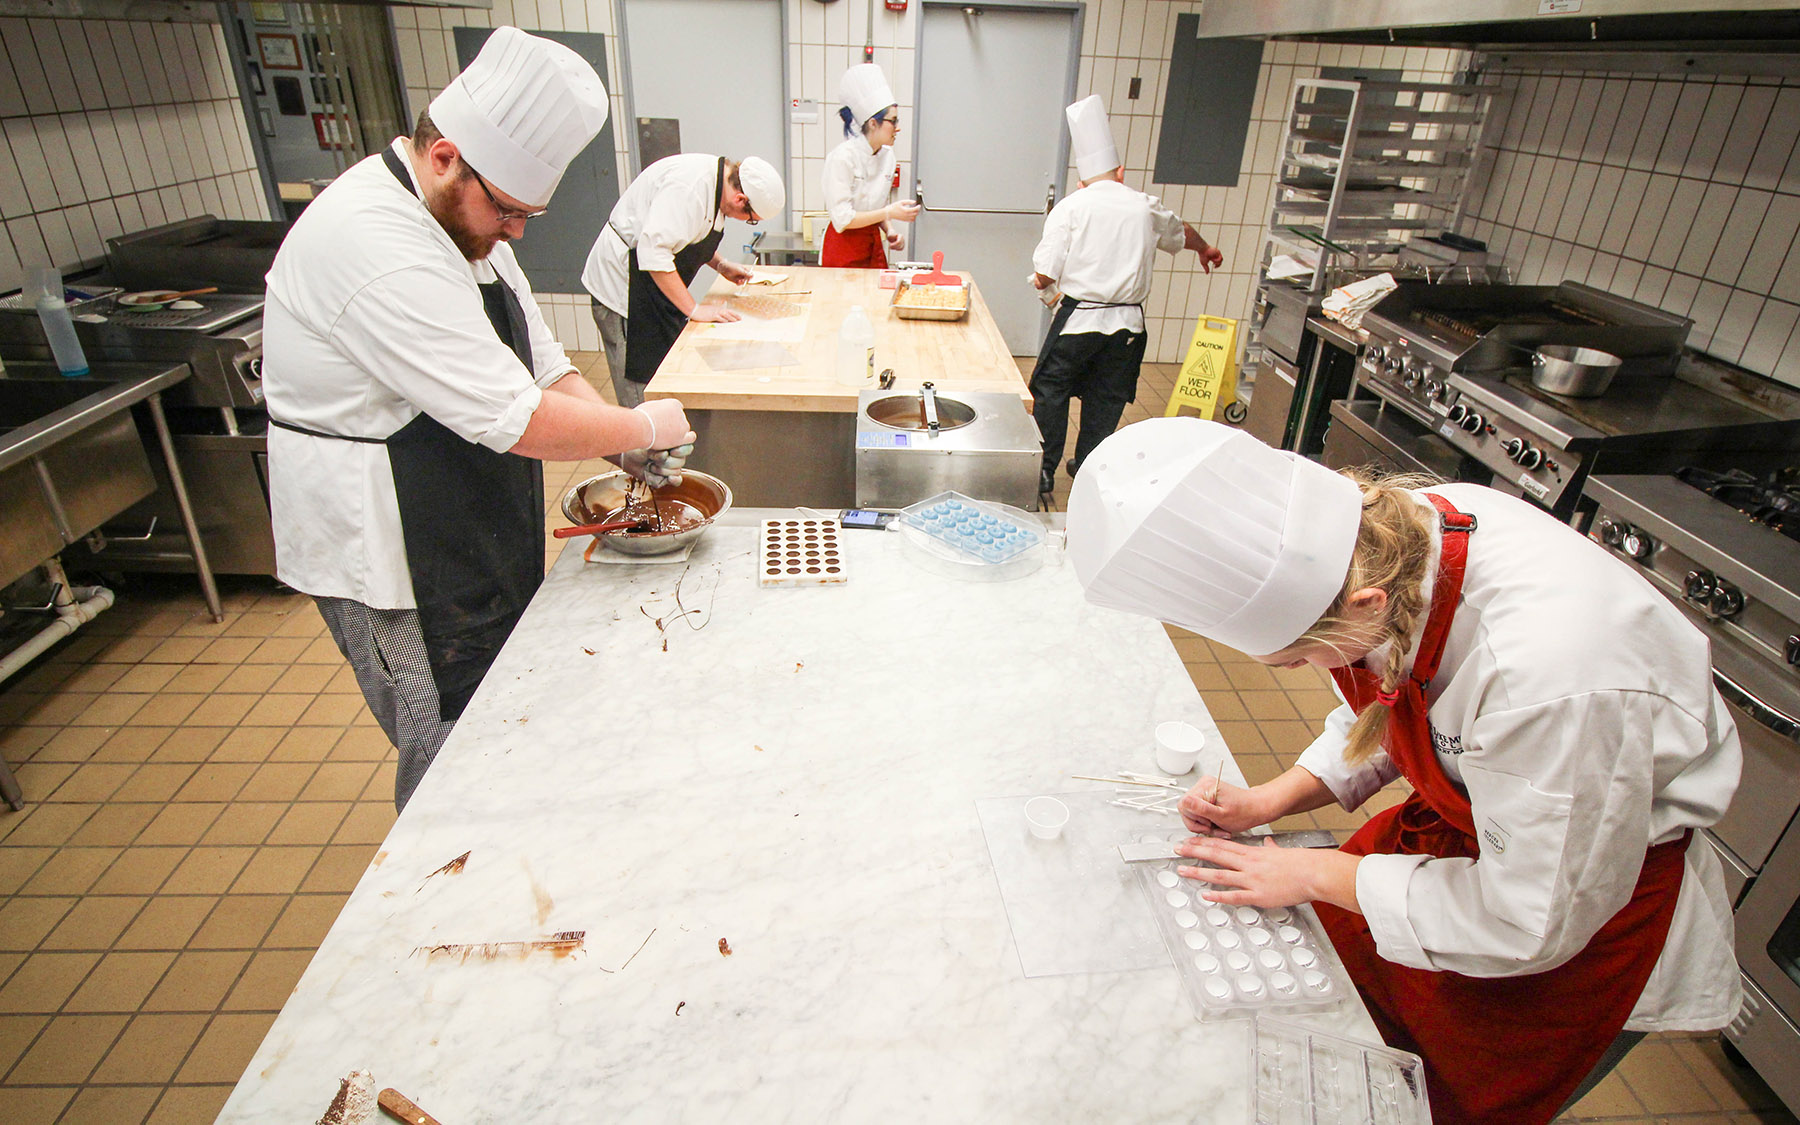 Students working with chocolate in the teaching kitchen.